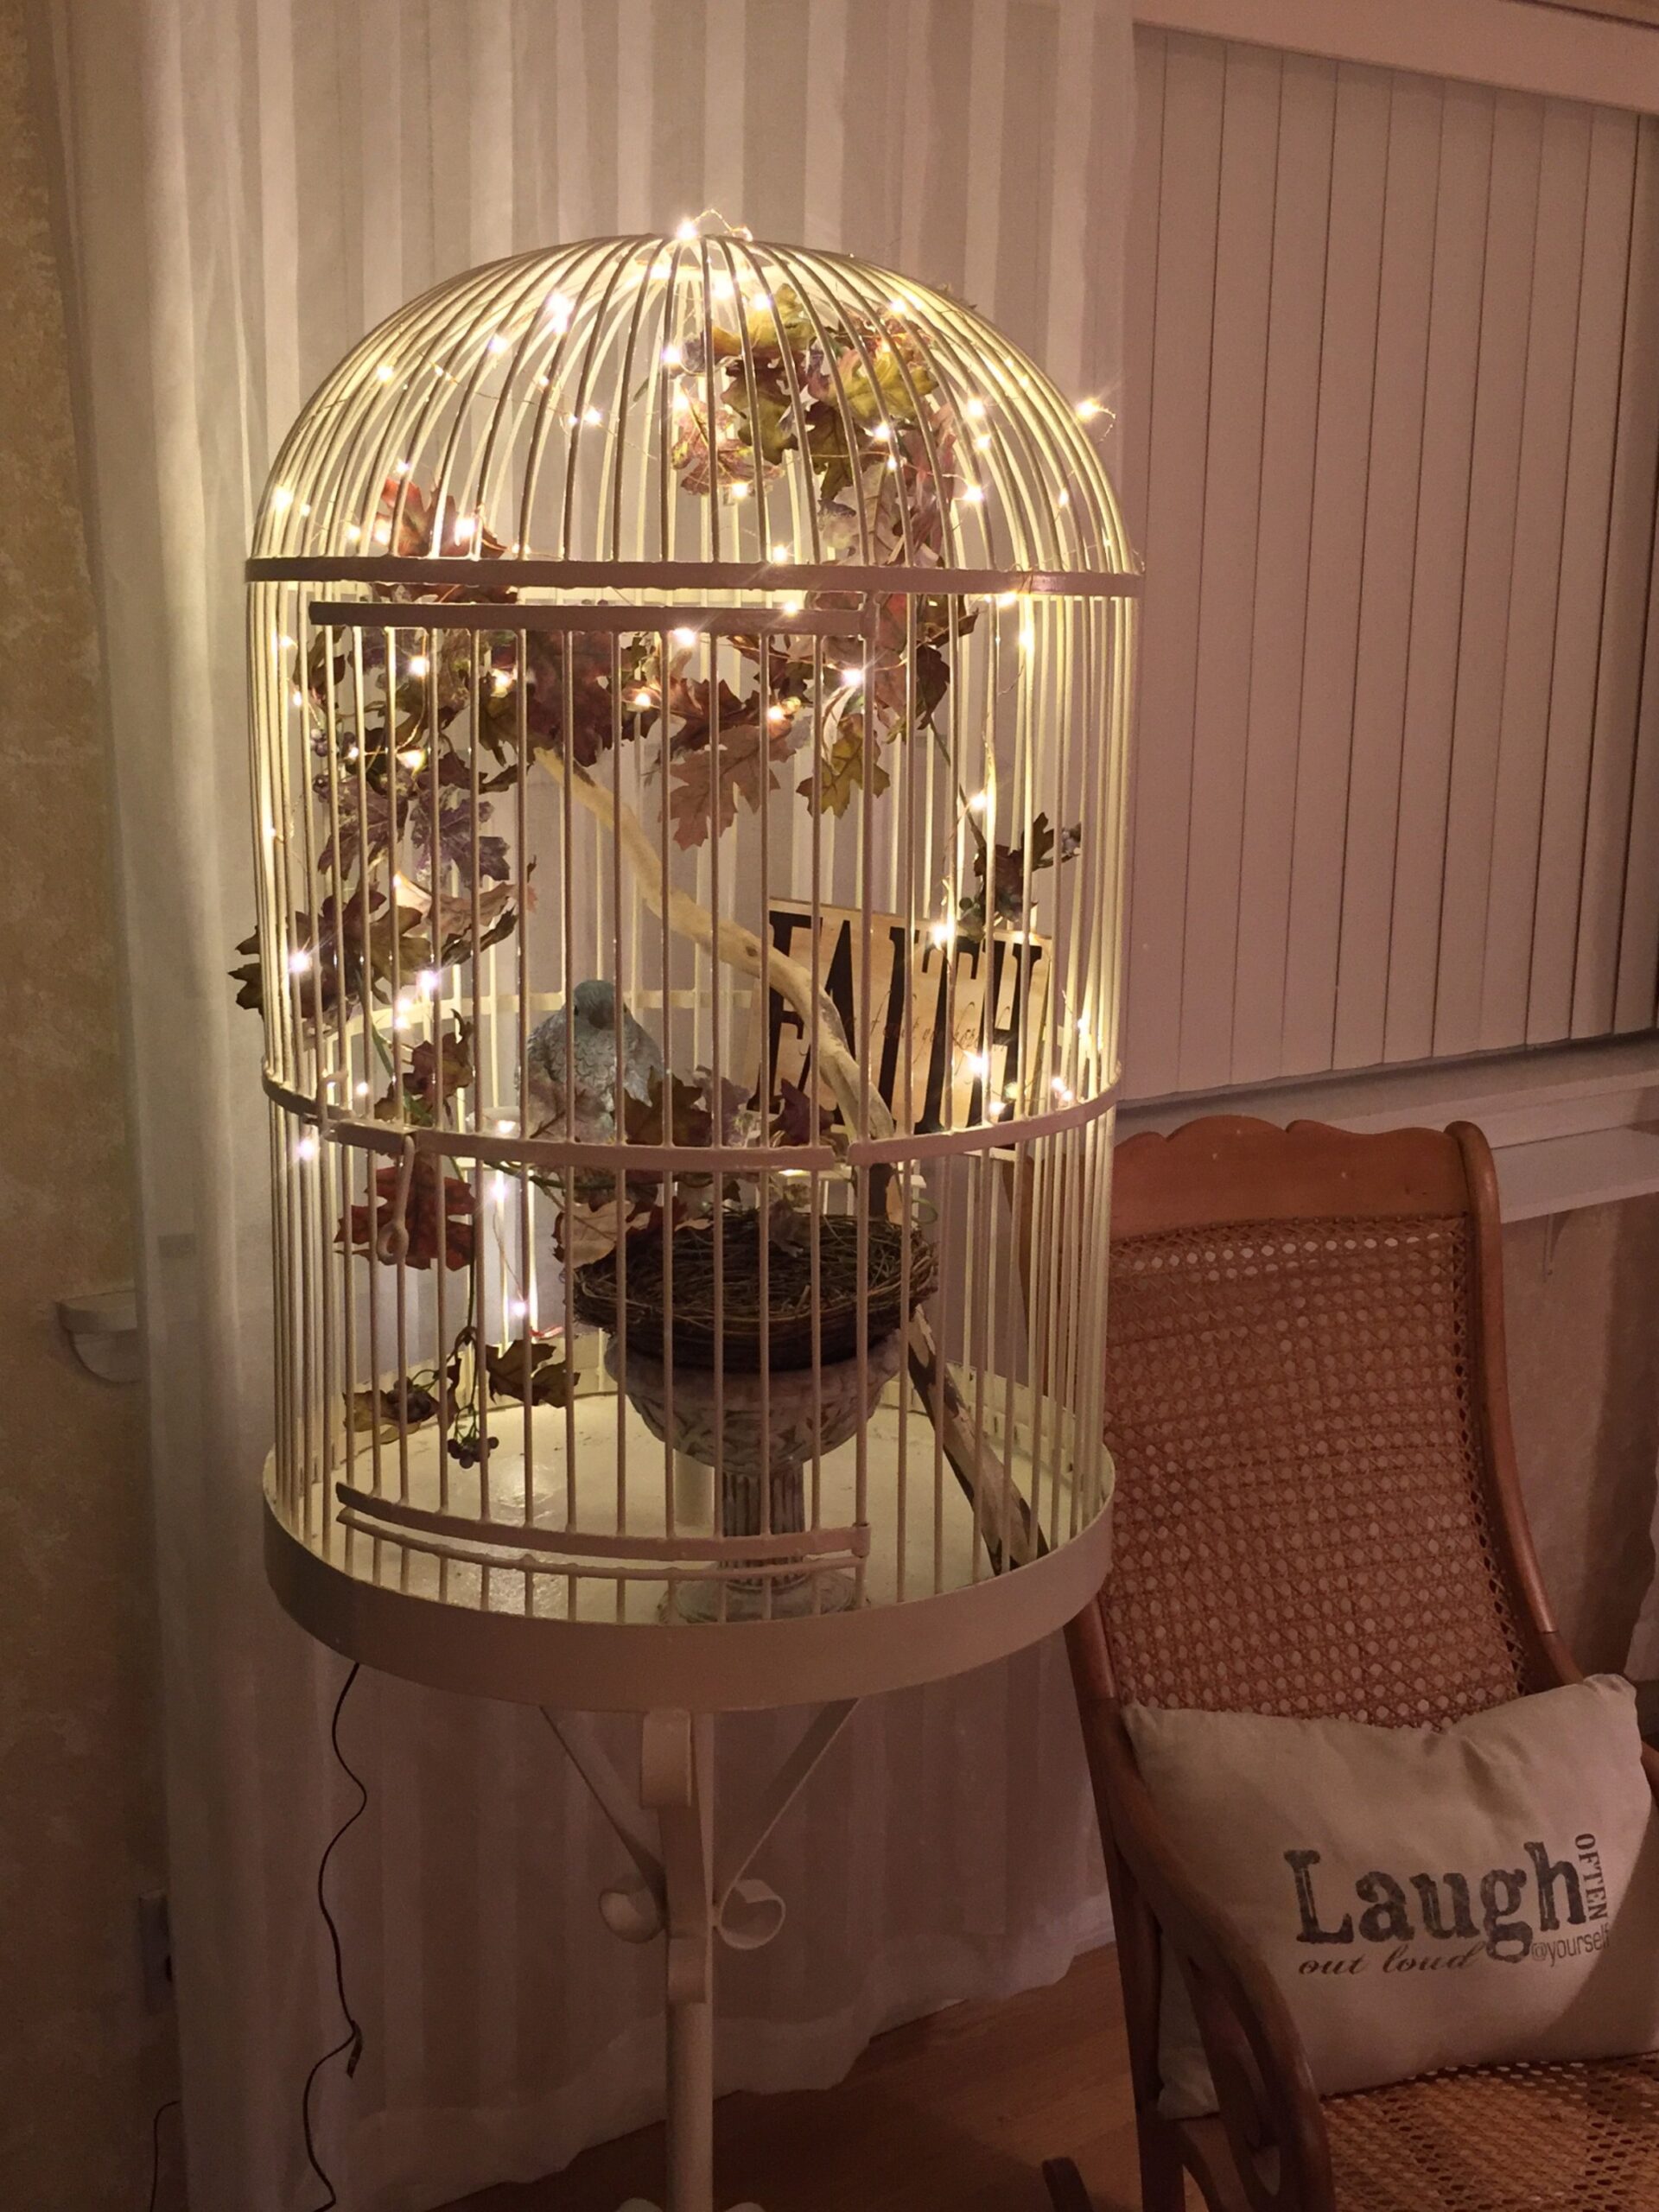 bird cage decoration with lights Bulan 5 My love for birds and bird cages led me to this wonderful vintage